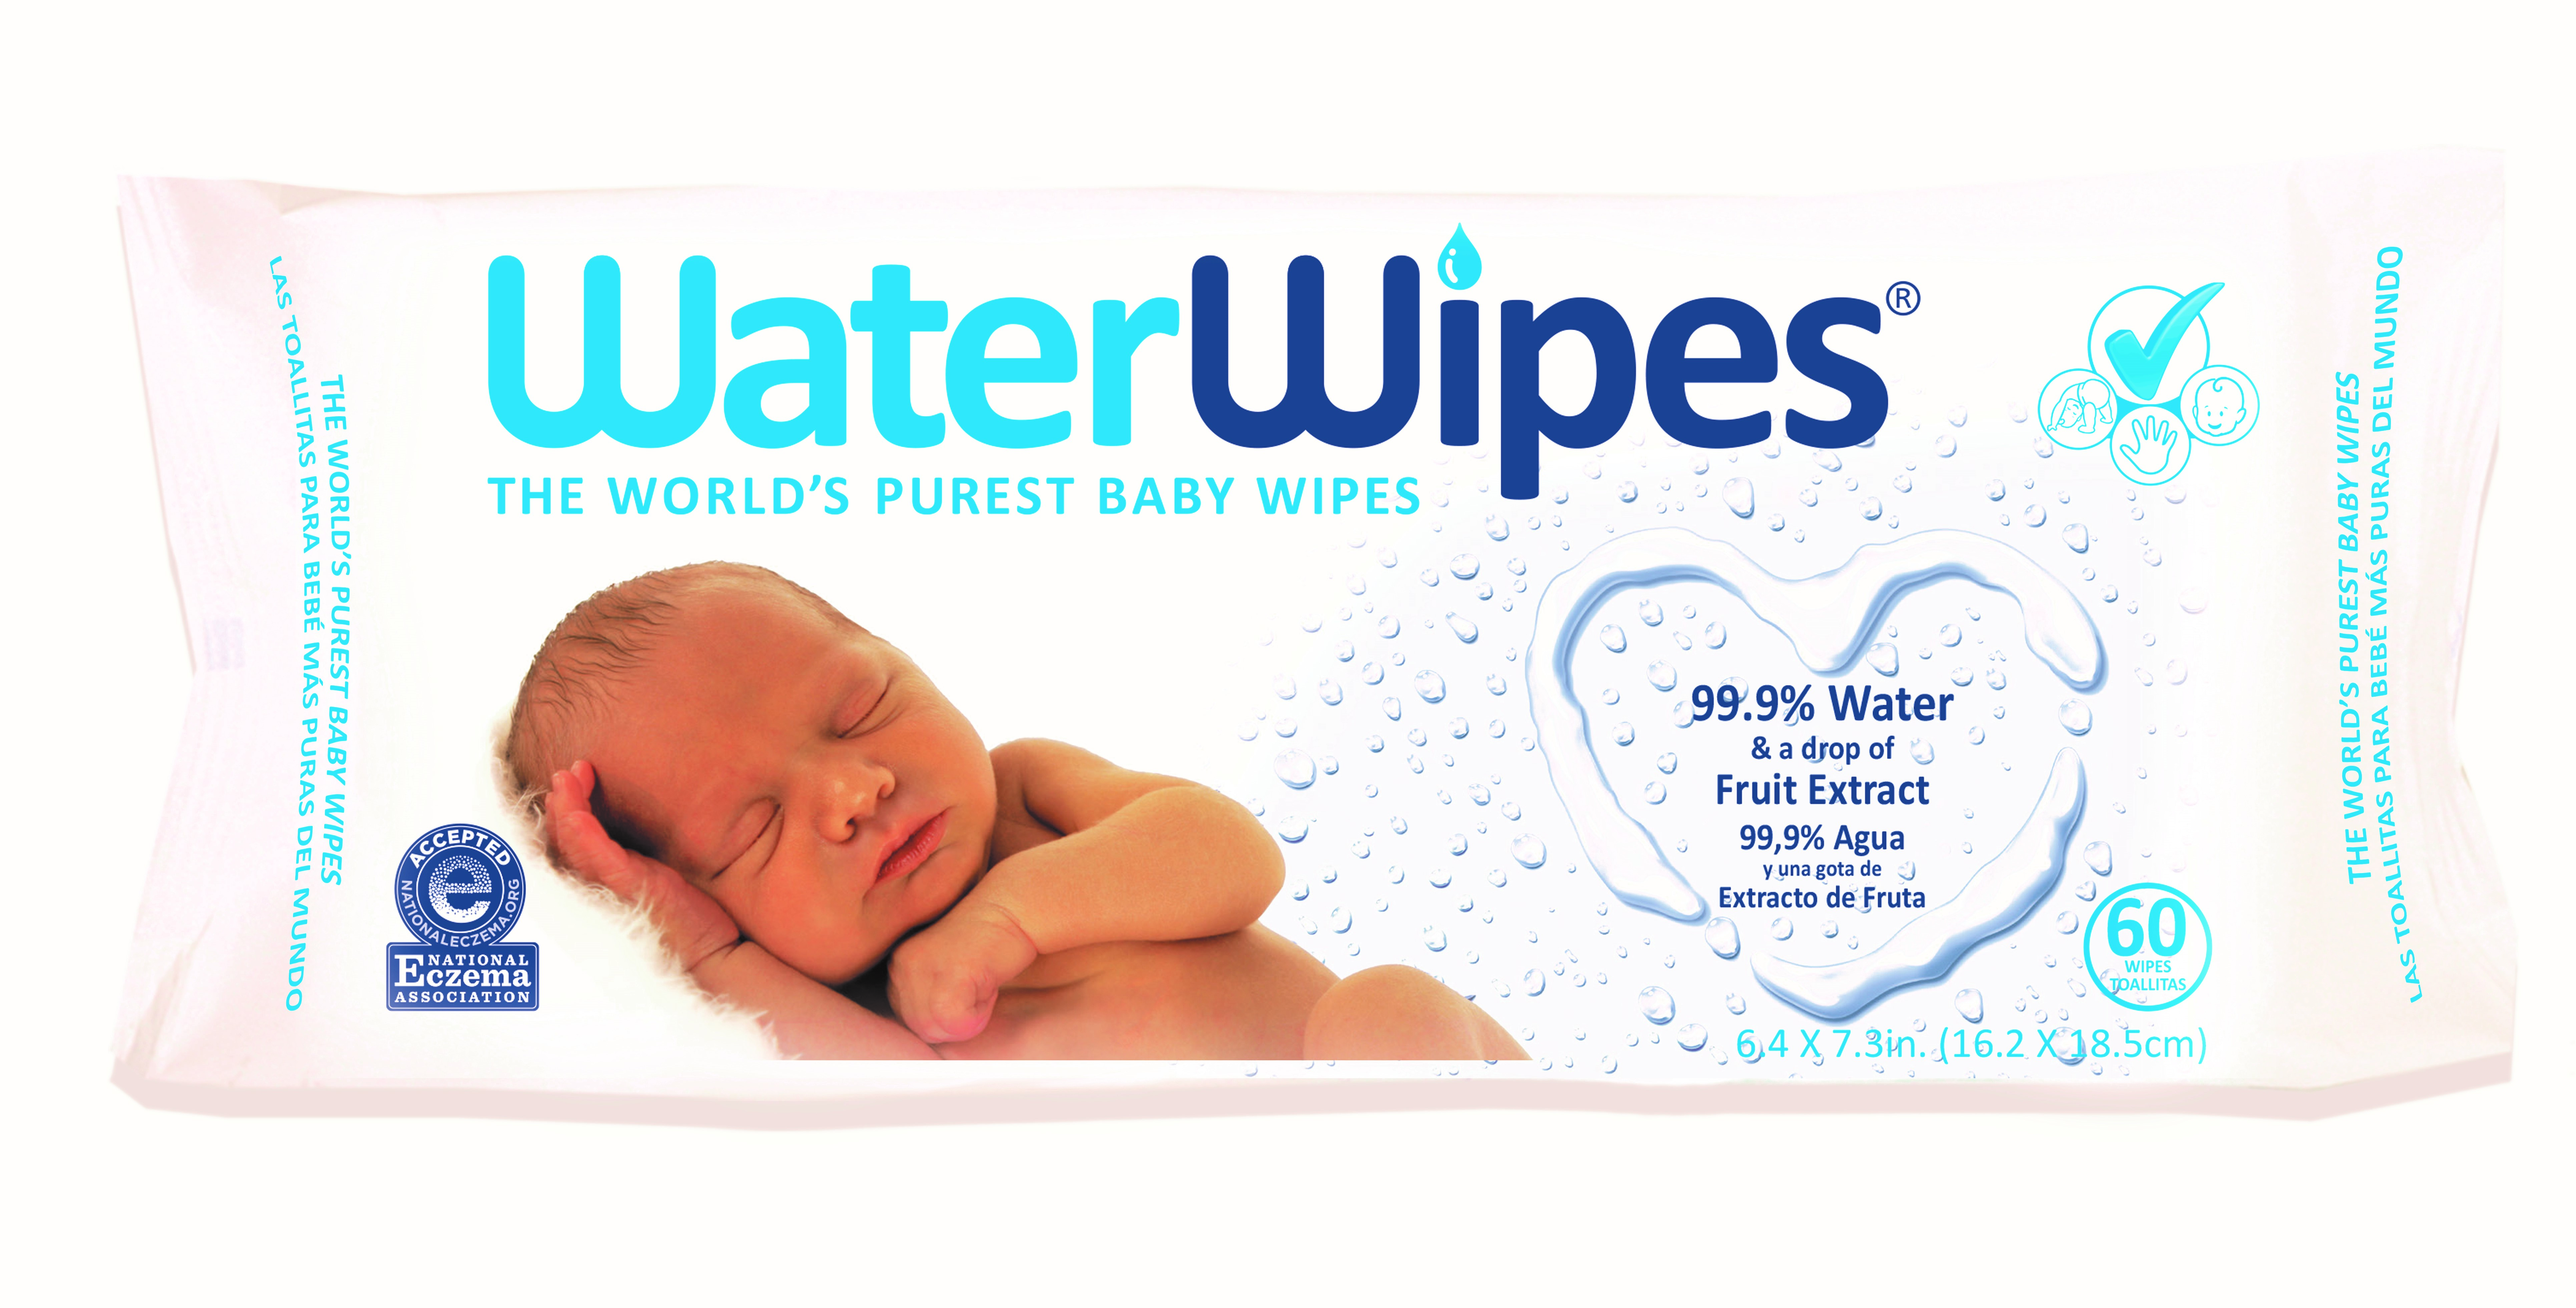 WaterWipes, The Purest Baby Wipe